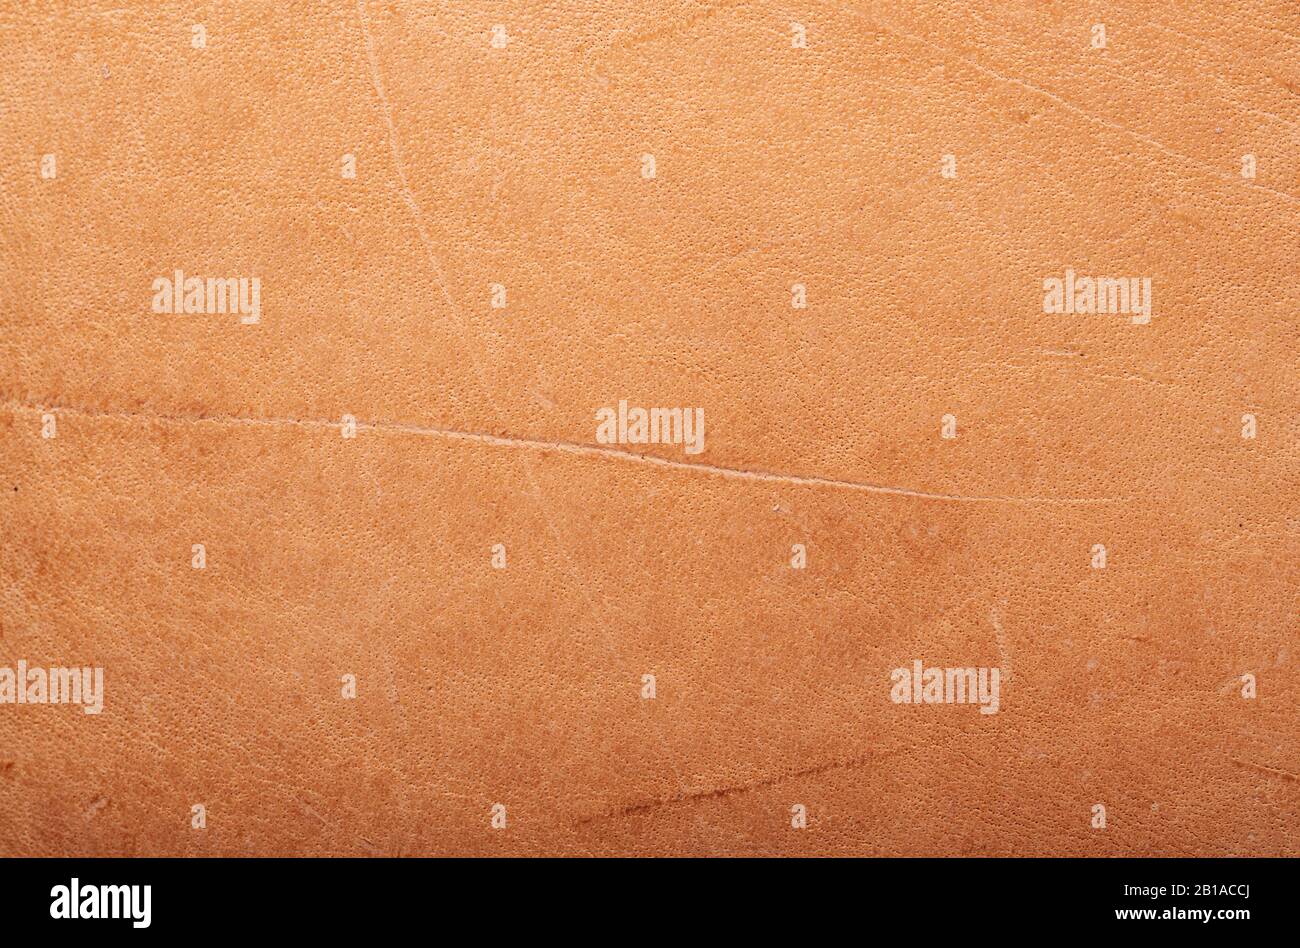 Natural vegetable tanned leather closeup macro full frame texture showing top grain and scratch wear marks Stock Photo